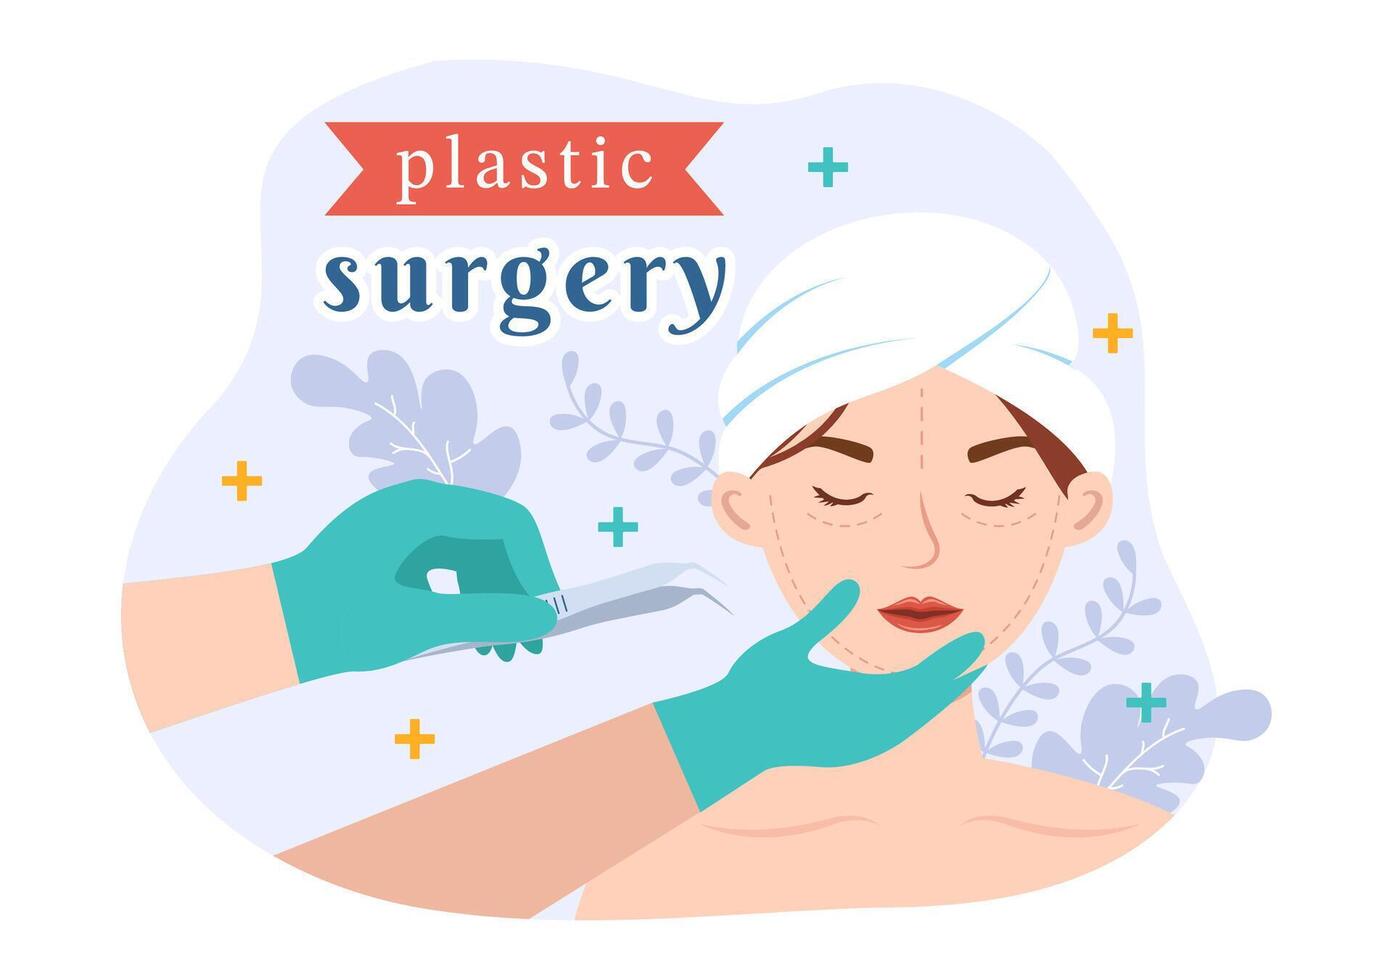 Plastic Surgery Vector Illustration of Medical Surgical Operation on the Body or Face as Expected using Advanced Equipment in Cartoon Background